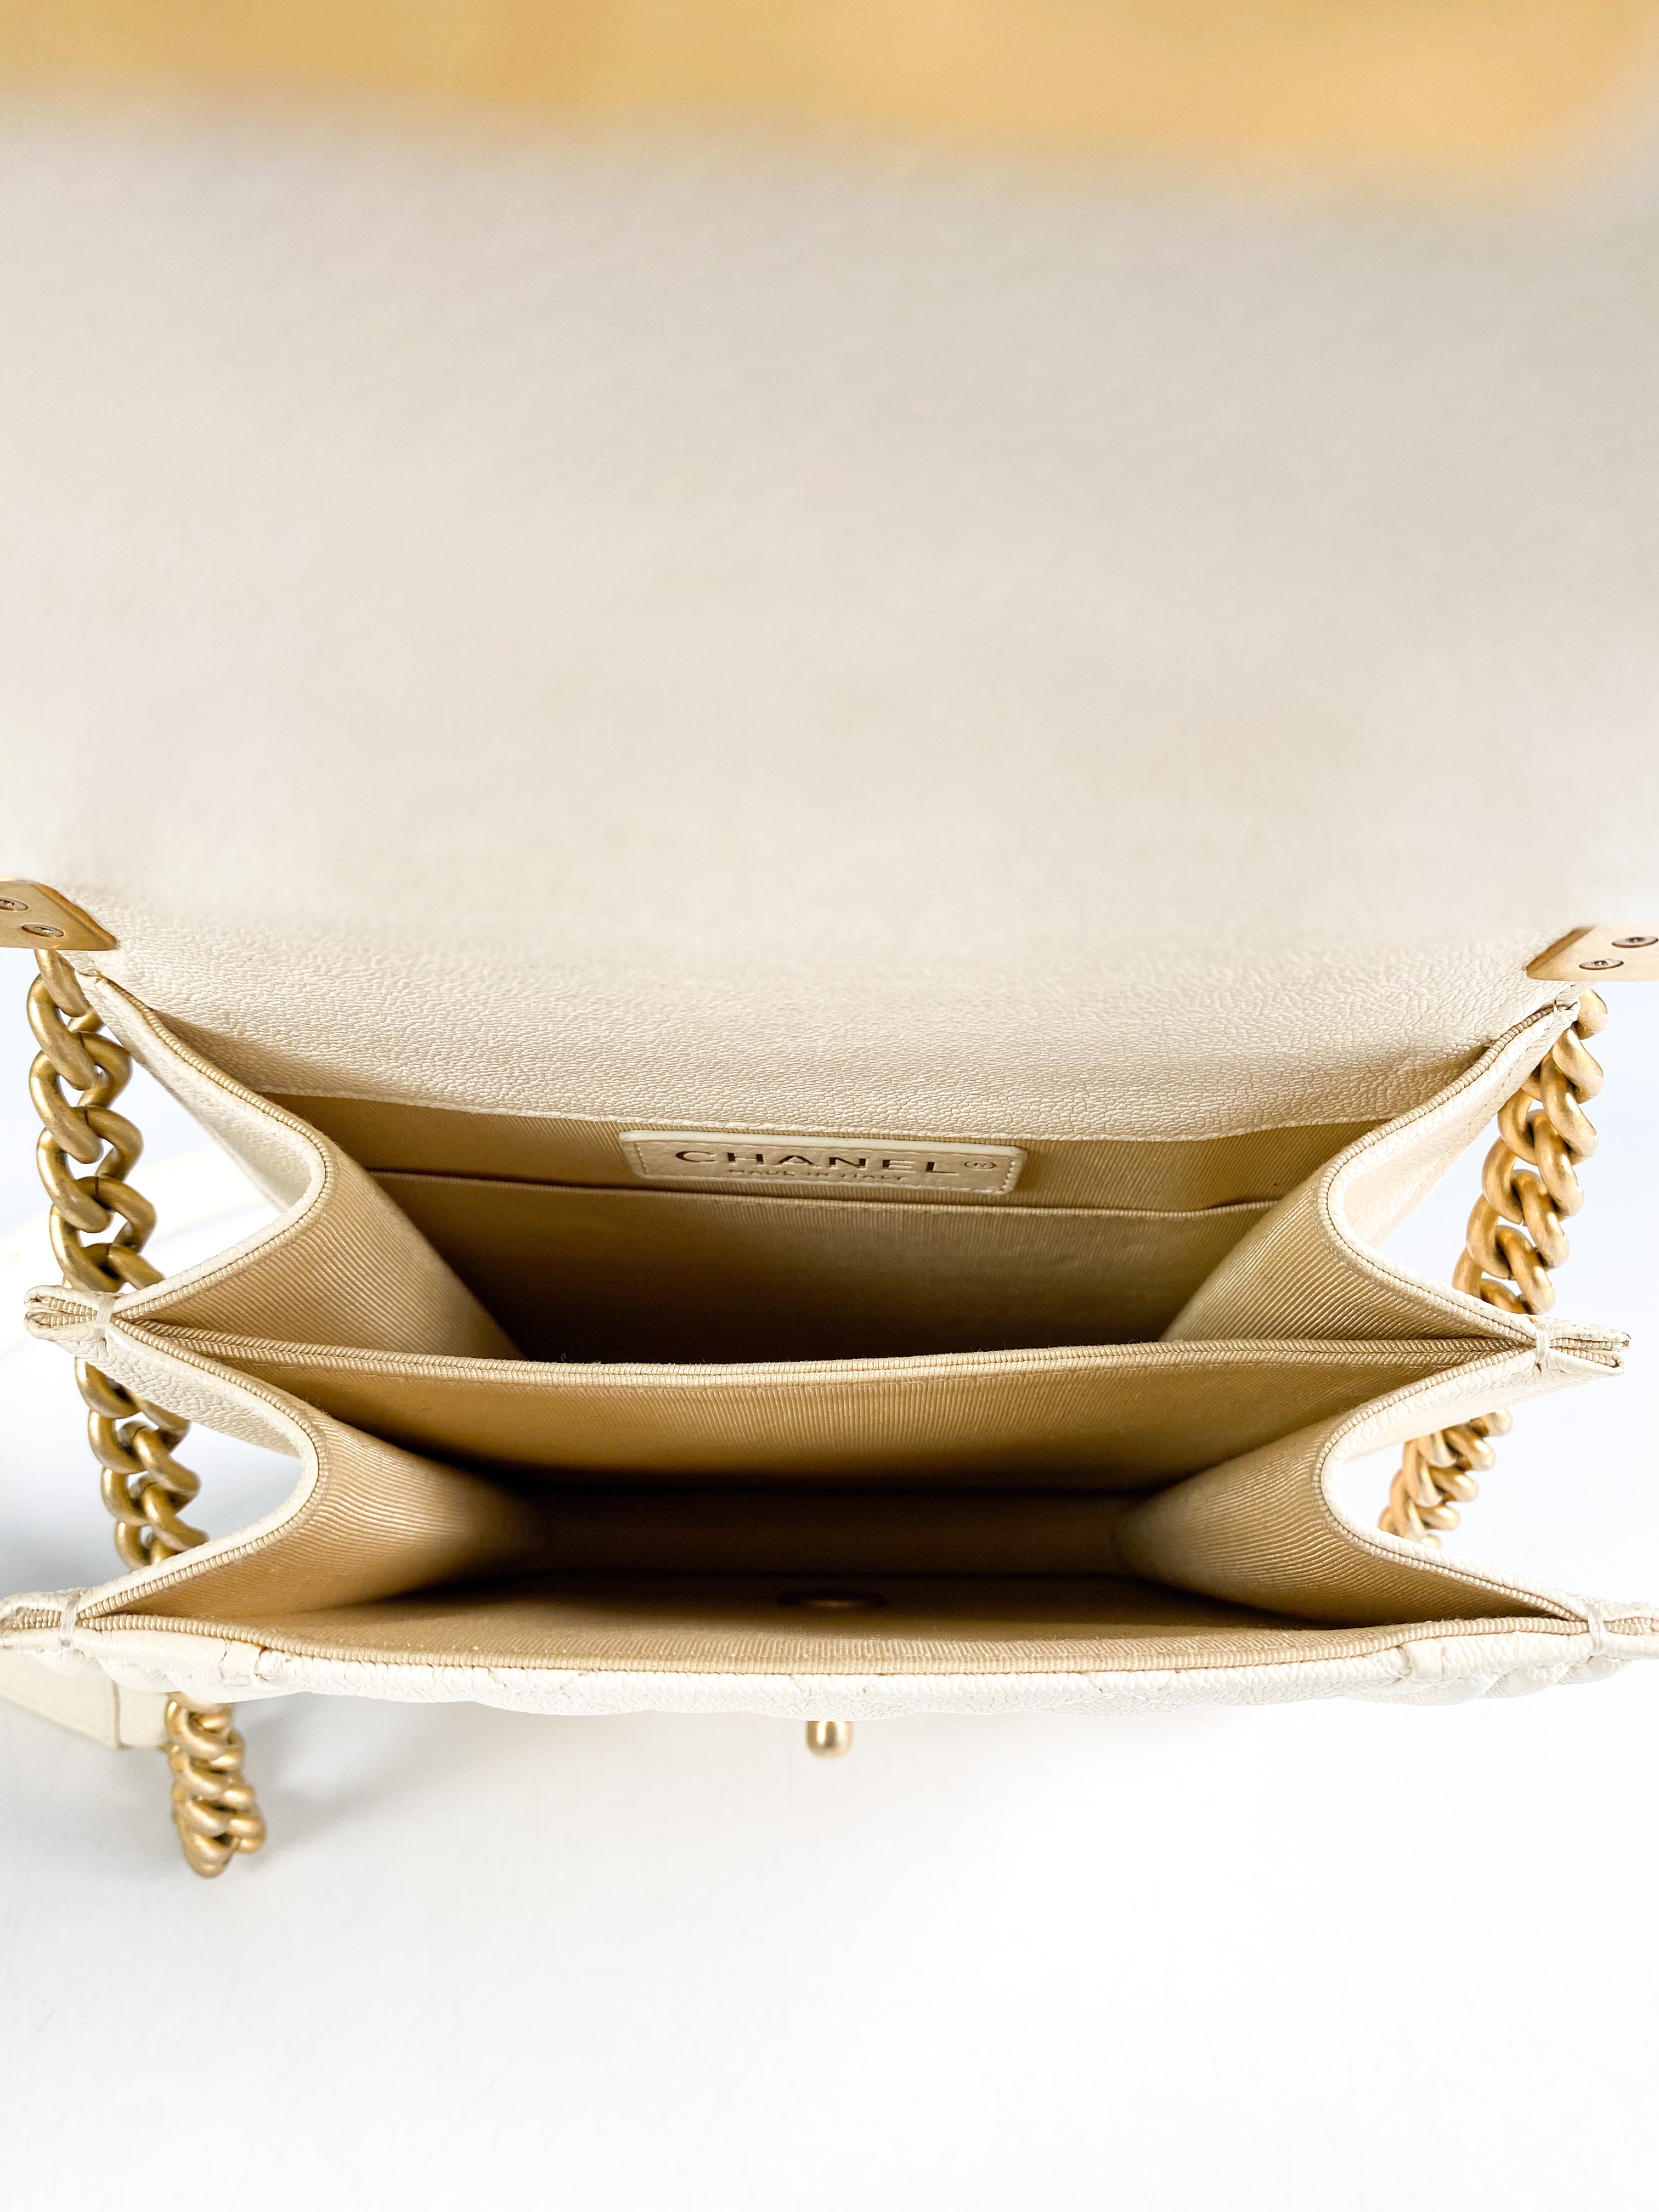 Chanel Cruise Boy North South in White Caviar Leather and Aged Gold Hardware Series 26